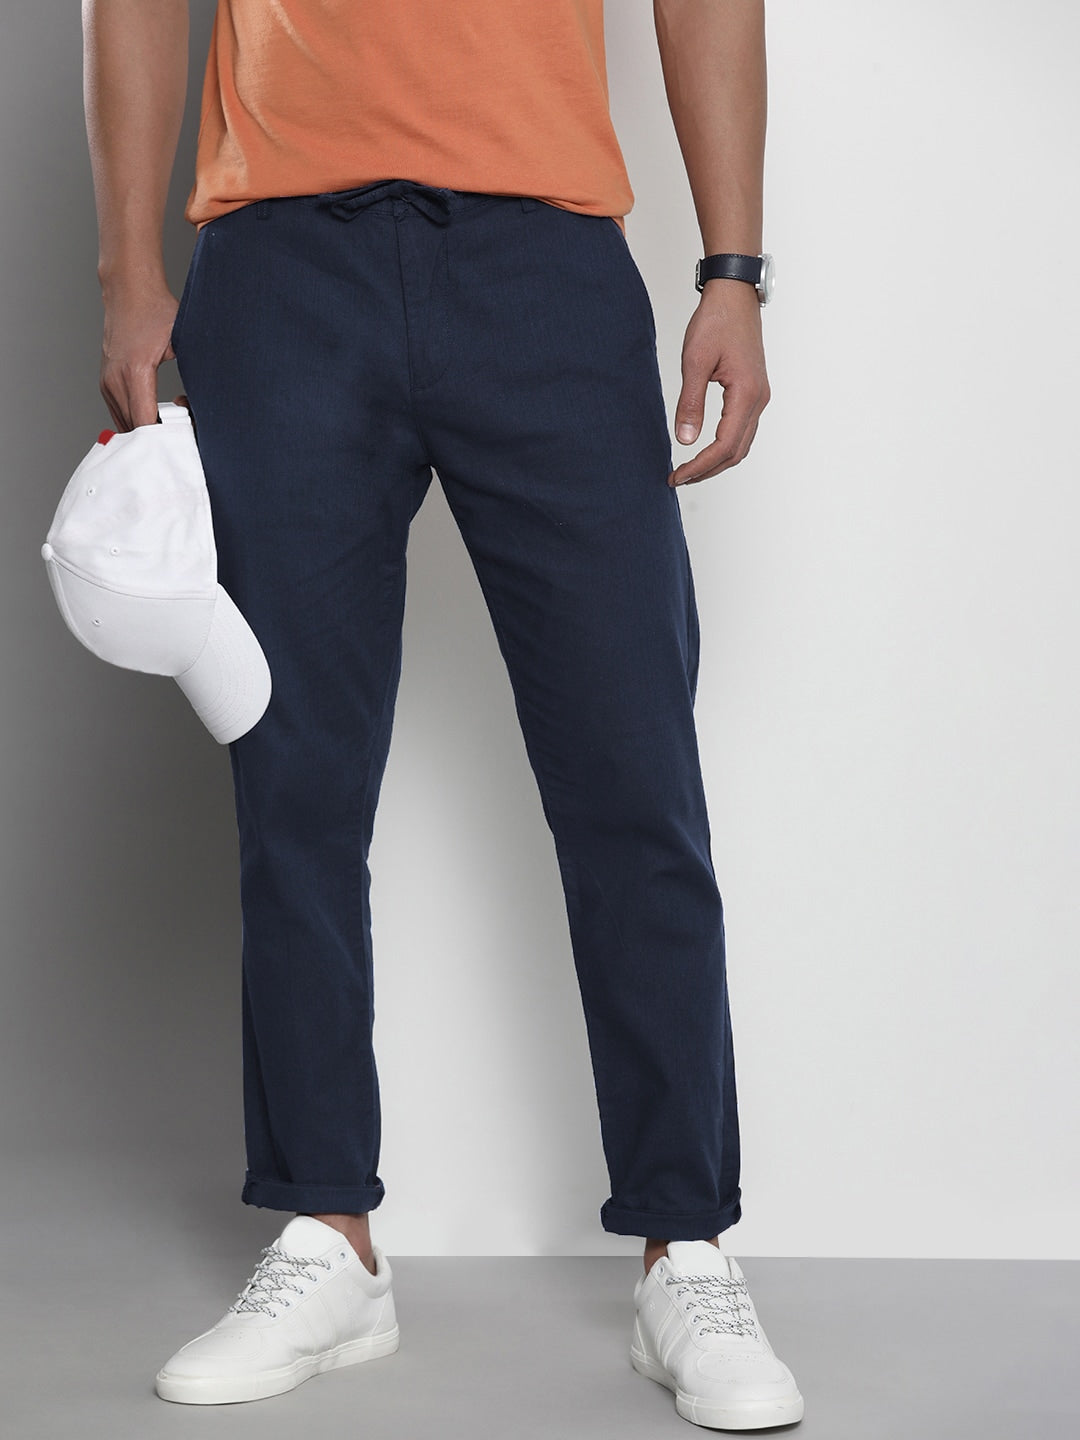 Buy Navy Blue Trousers & Pants for Men by The Indian Garage Co